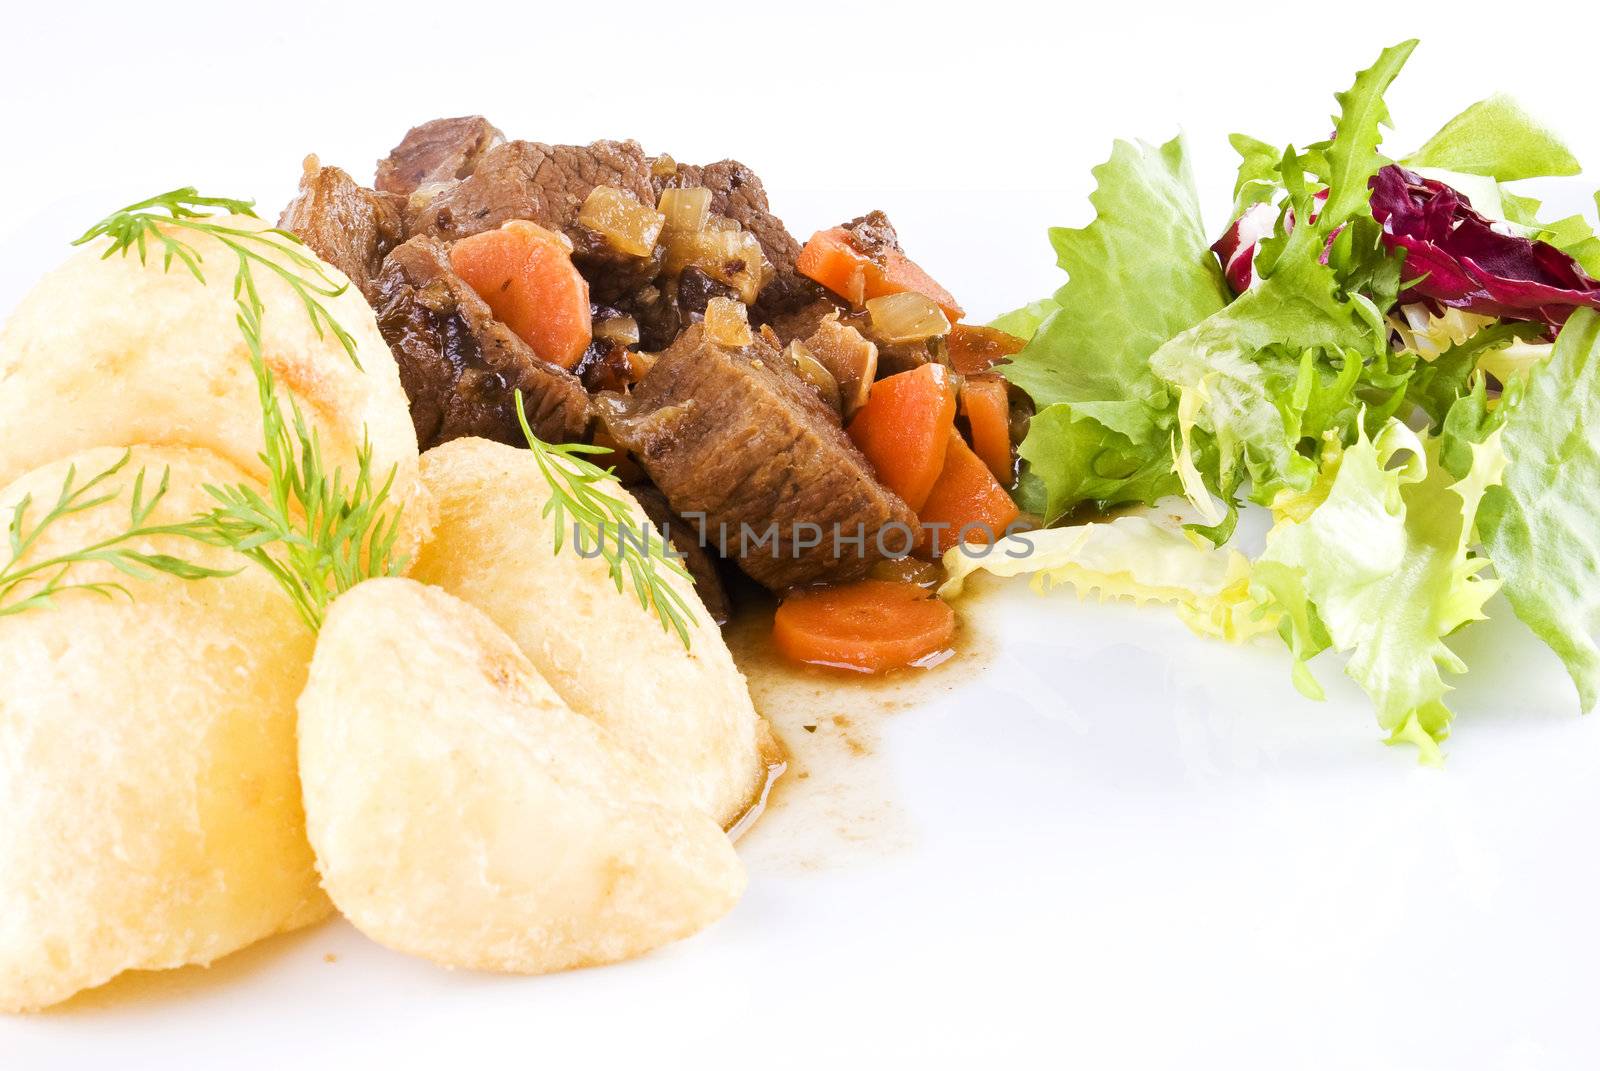 Meal of stewed beef steak with roast potatoes and fresh salad